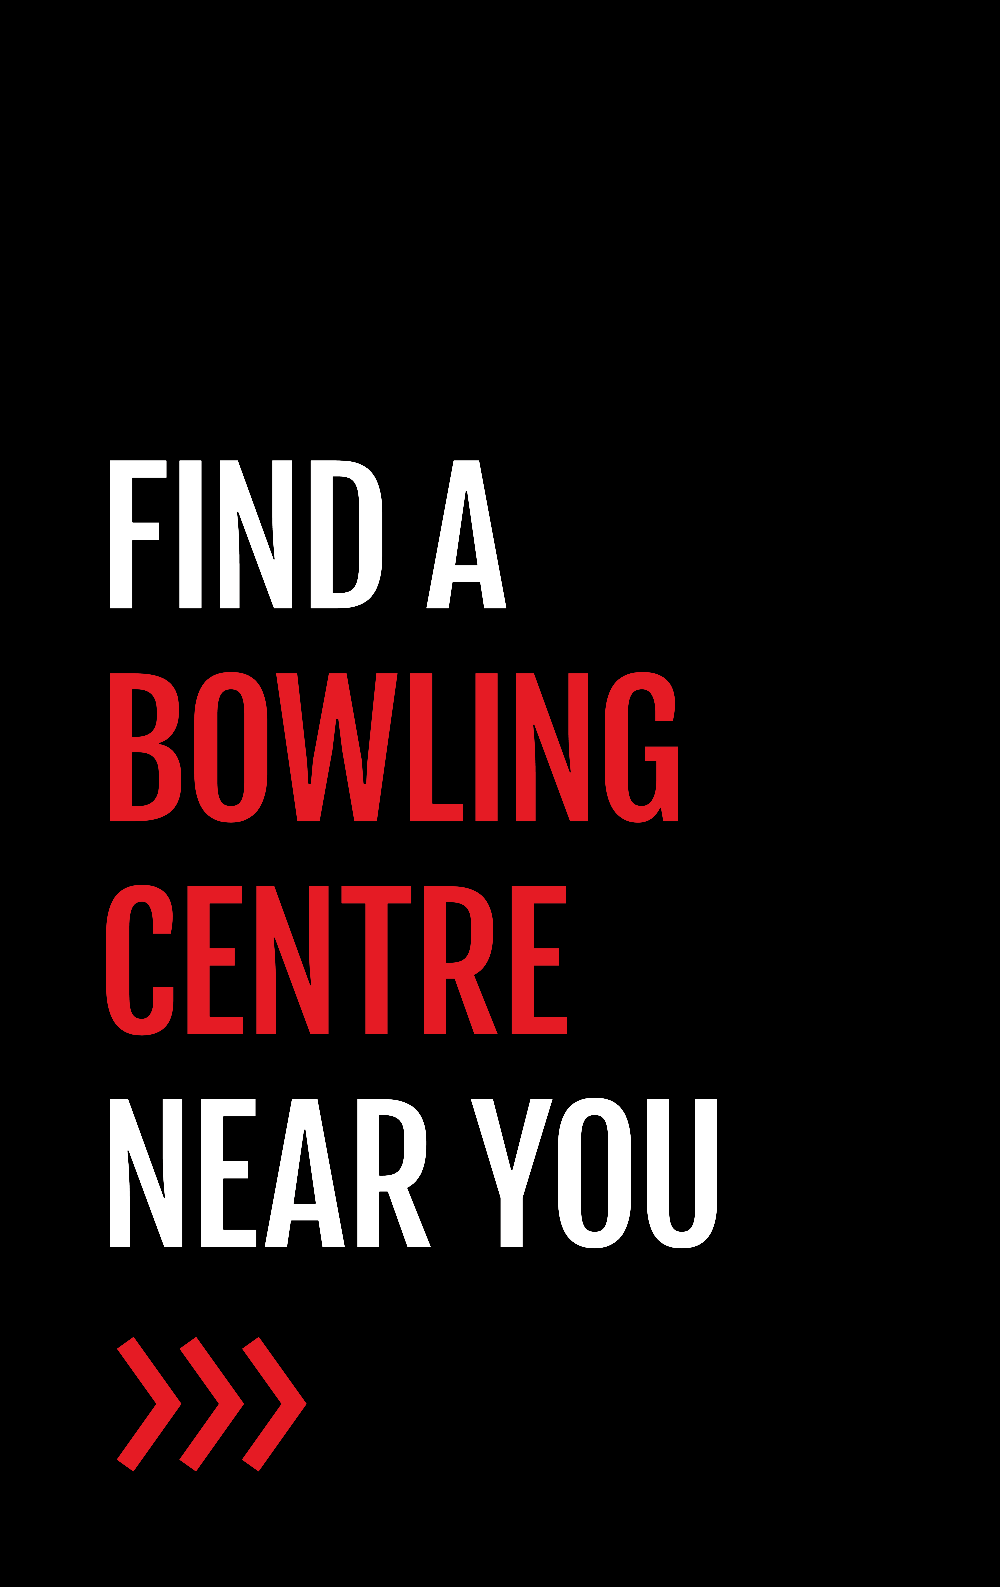 Find a Bowling Centre near you.